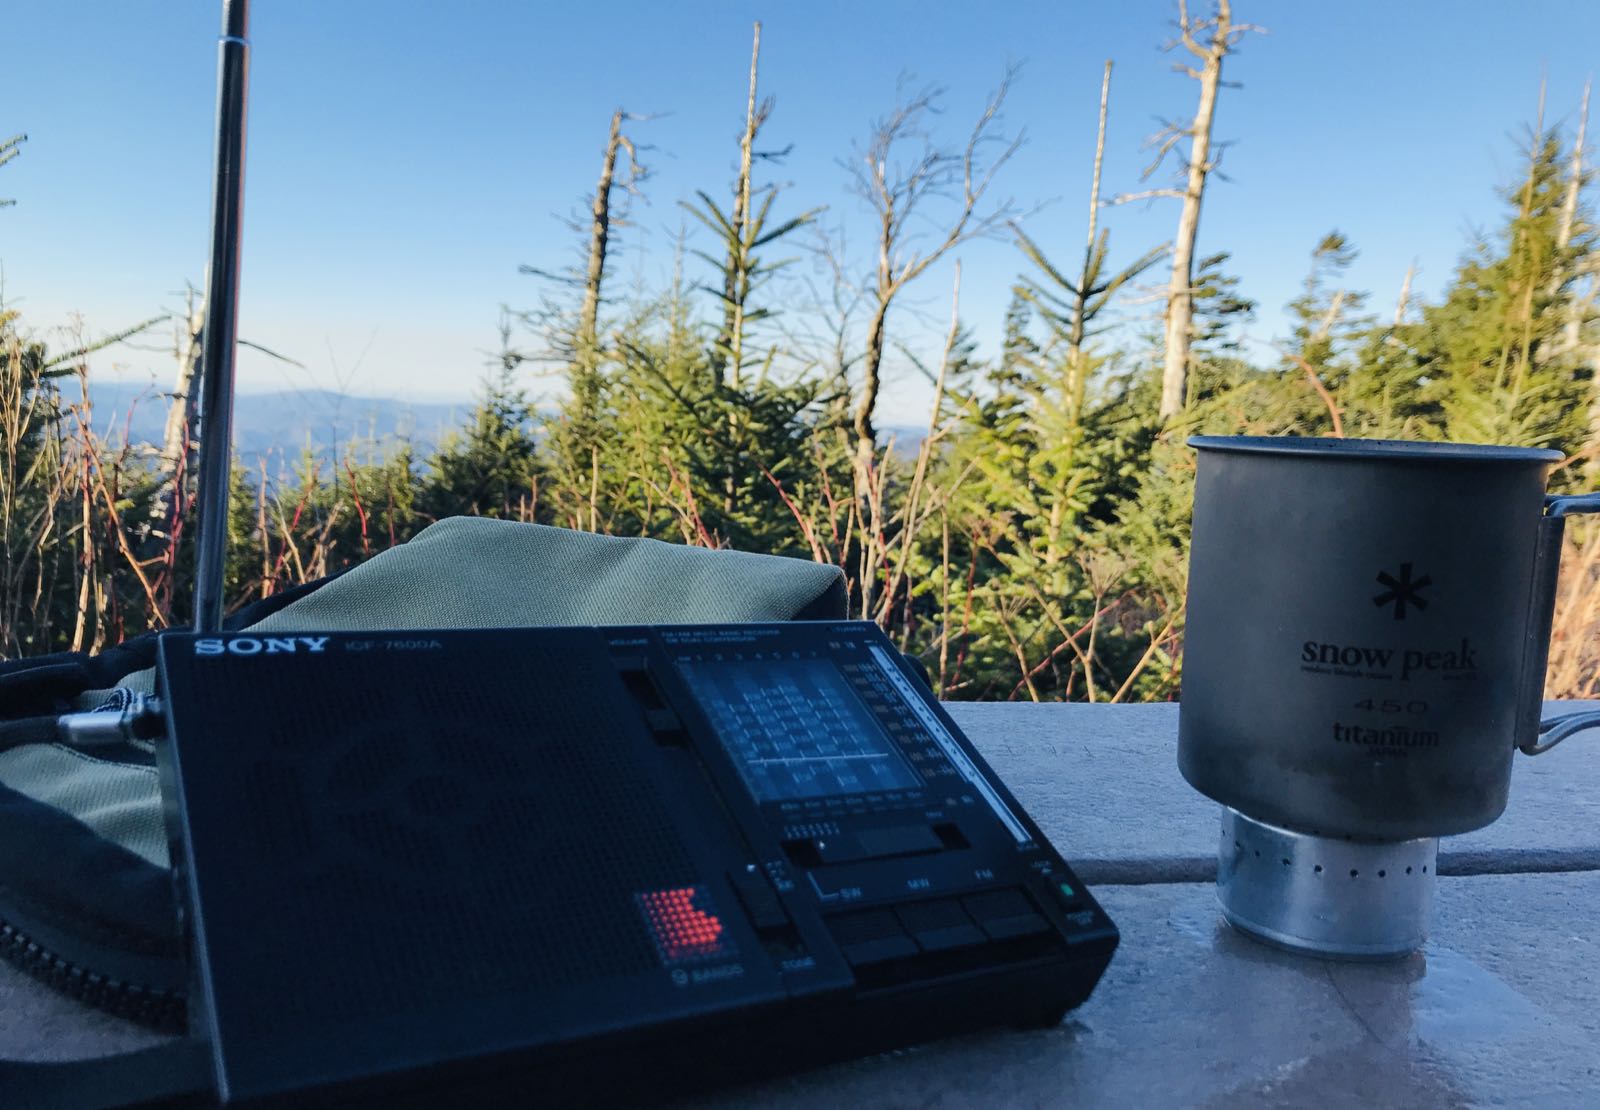 The Sony ICF-7600A at my “happy place” | The SWLing Post